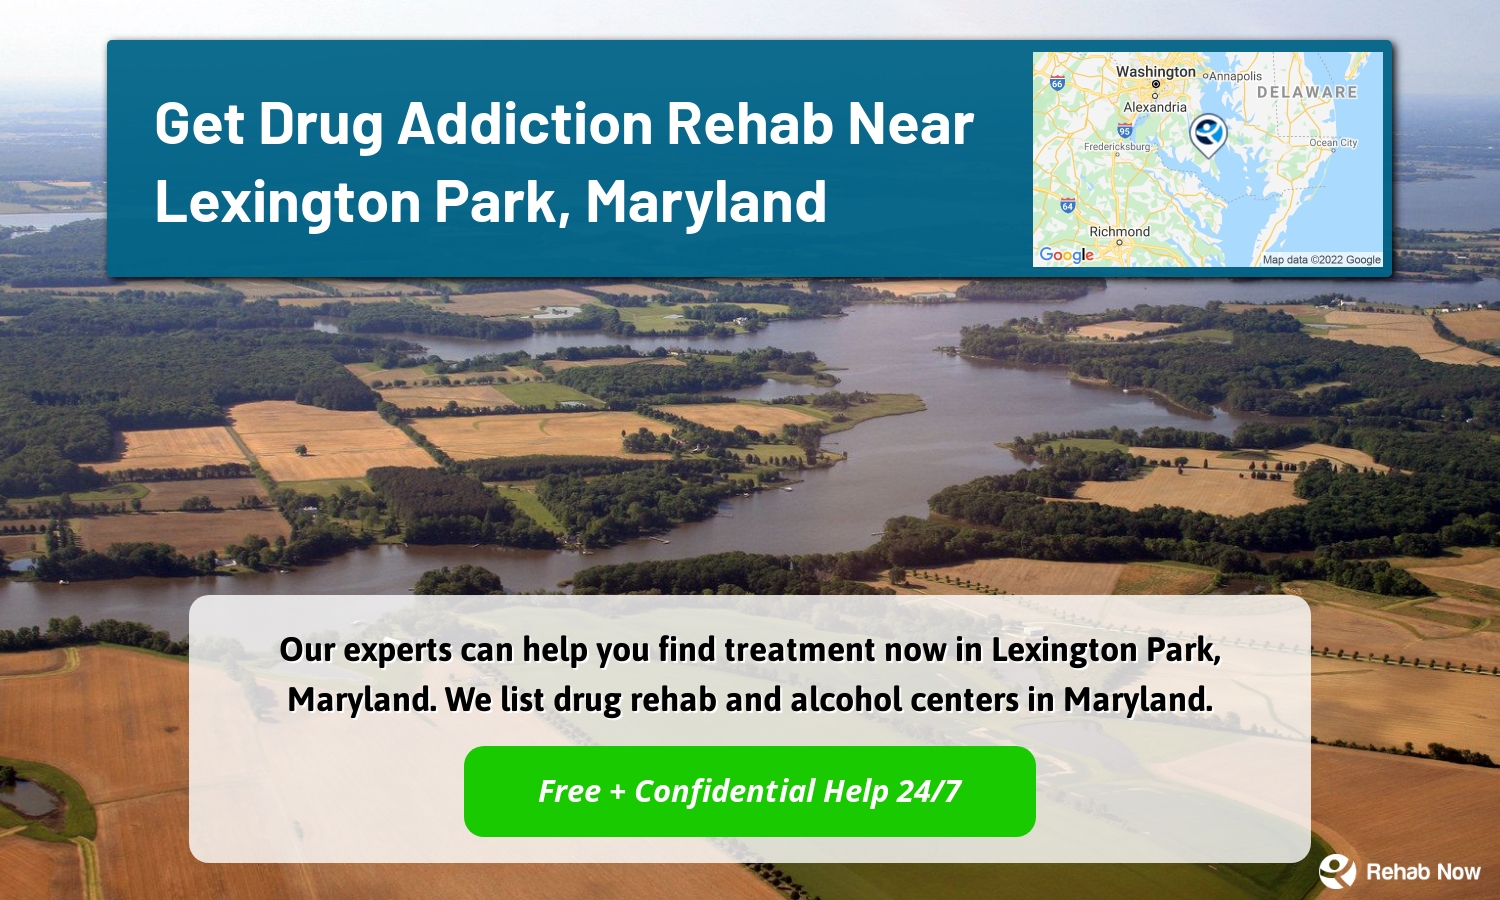 Our experts can help you find treatment now in Lexington Park, Maryland. We list drug rehab and alcohol centers in Maryland.